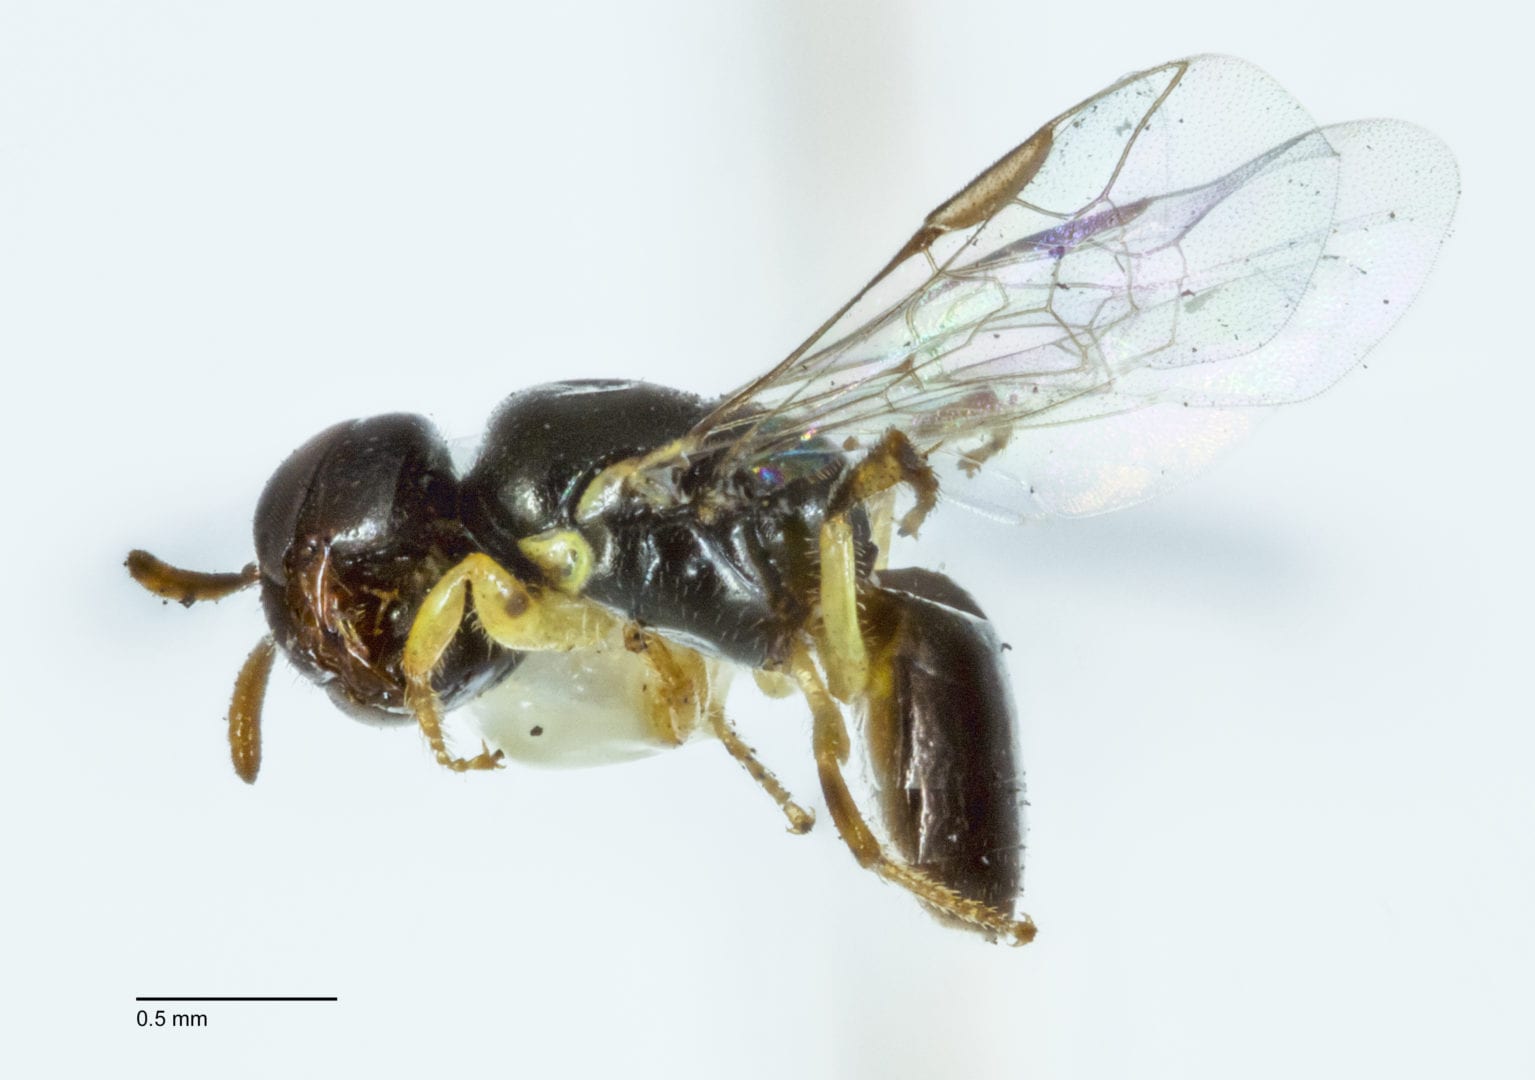 Image for Study finds tiny cavities in Banksia trees are nests for native bees